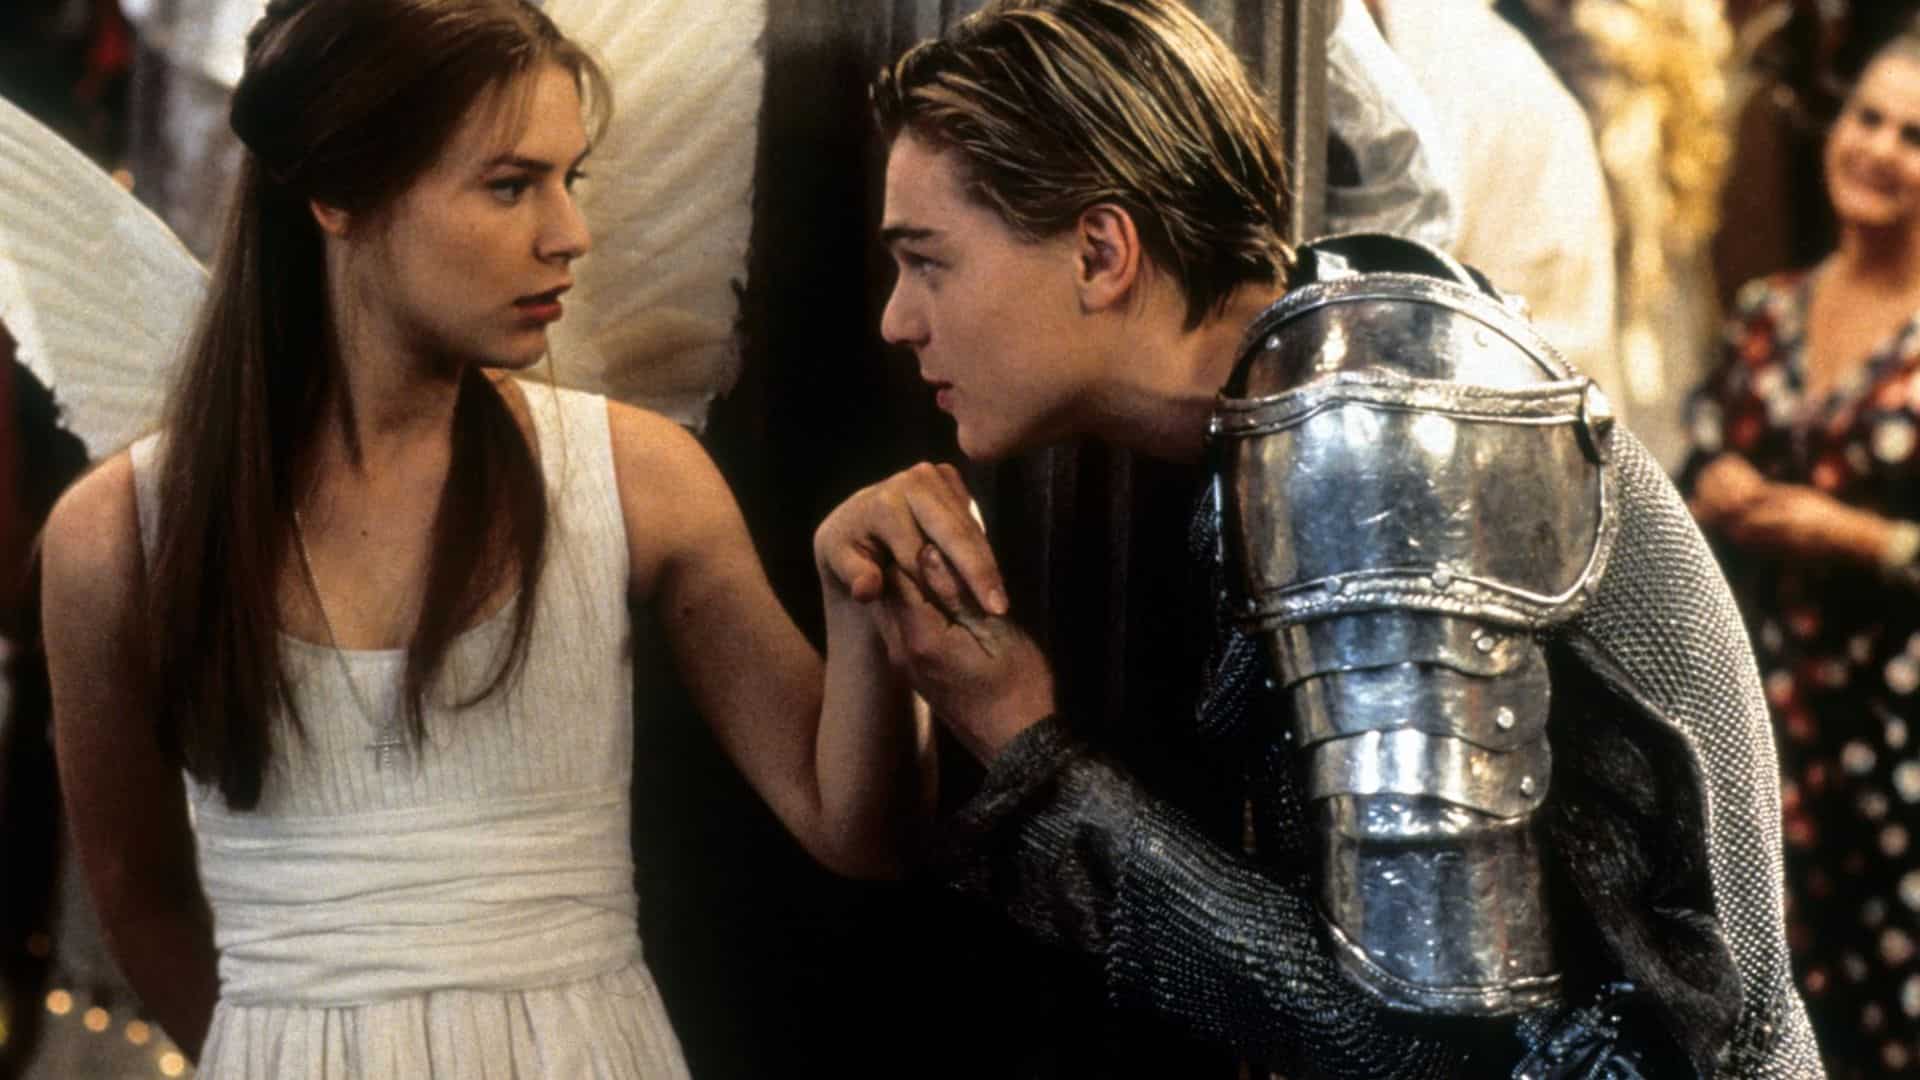 A teen boy in armor kisses the hand of a girl with angel wings in this image from Bazmark Films.